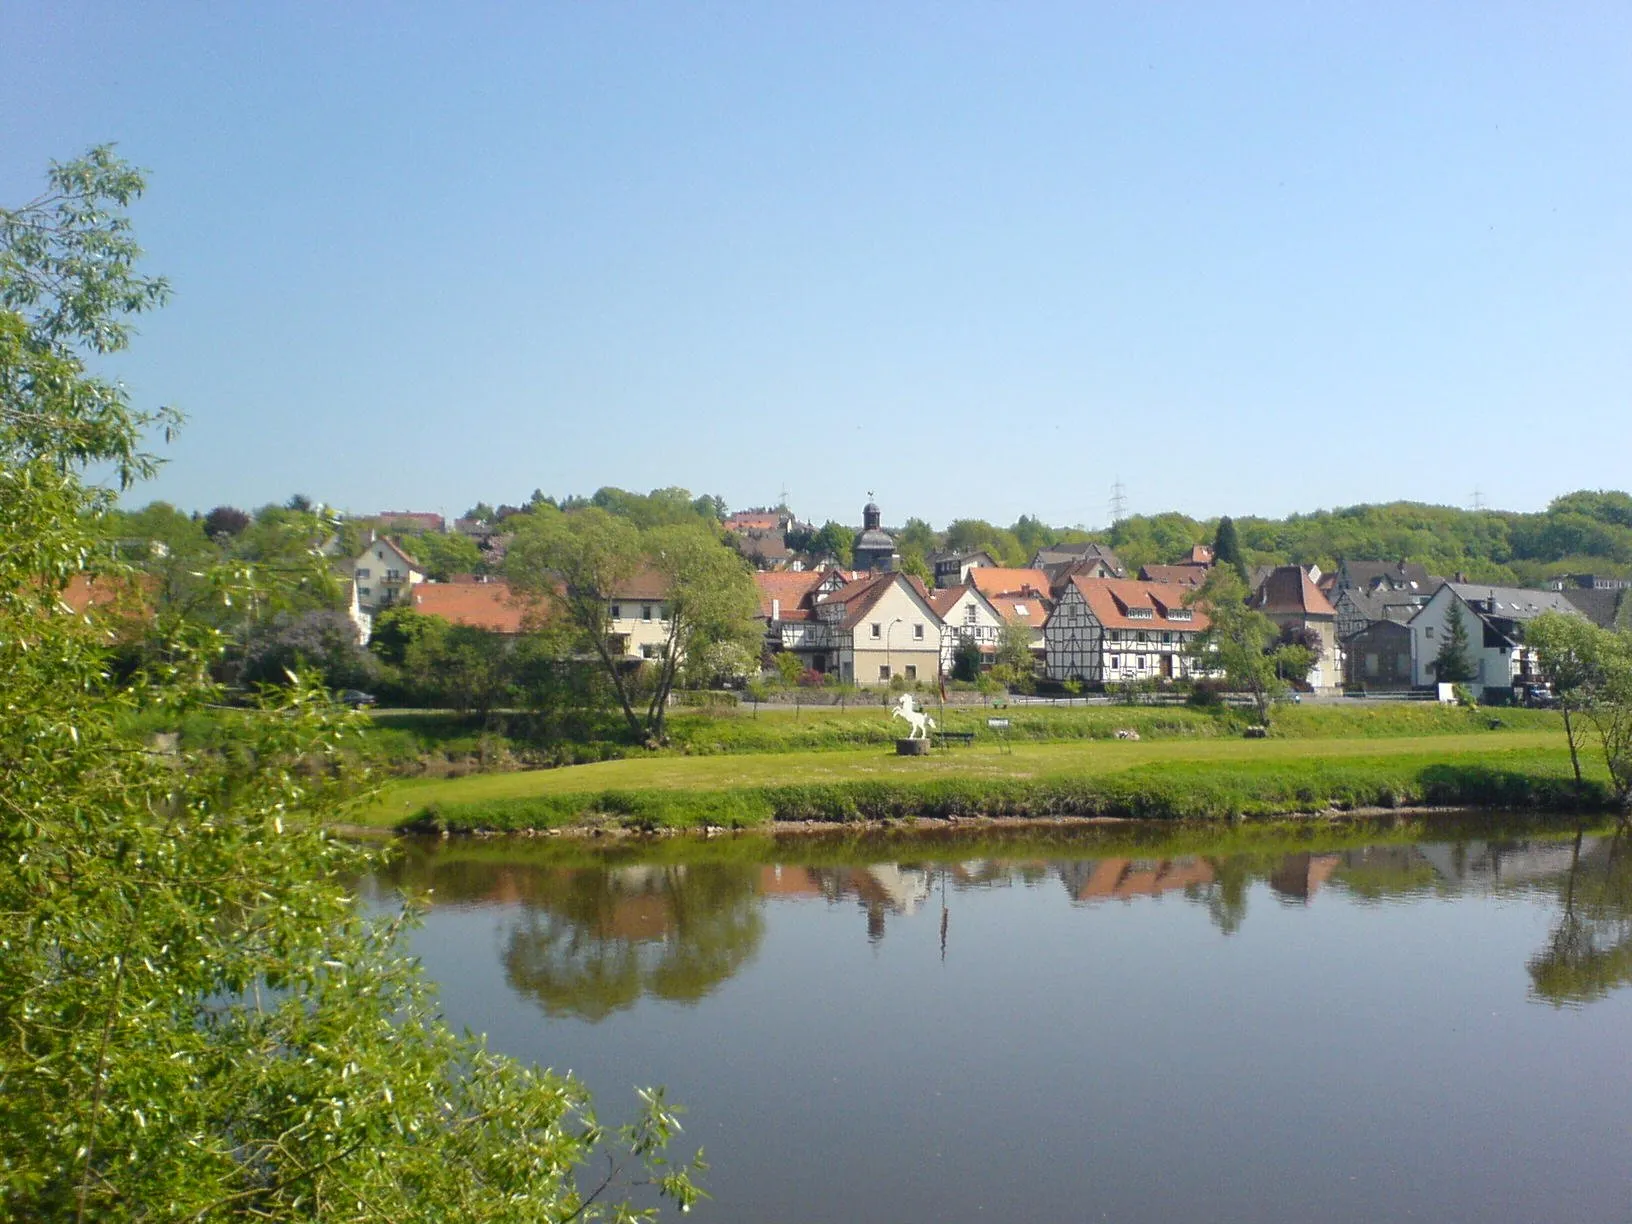 Photo showing: Village Speele with river Fulda. Speele is located between Kassel and Hann. Münden